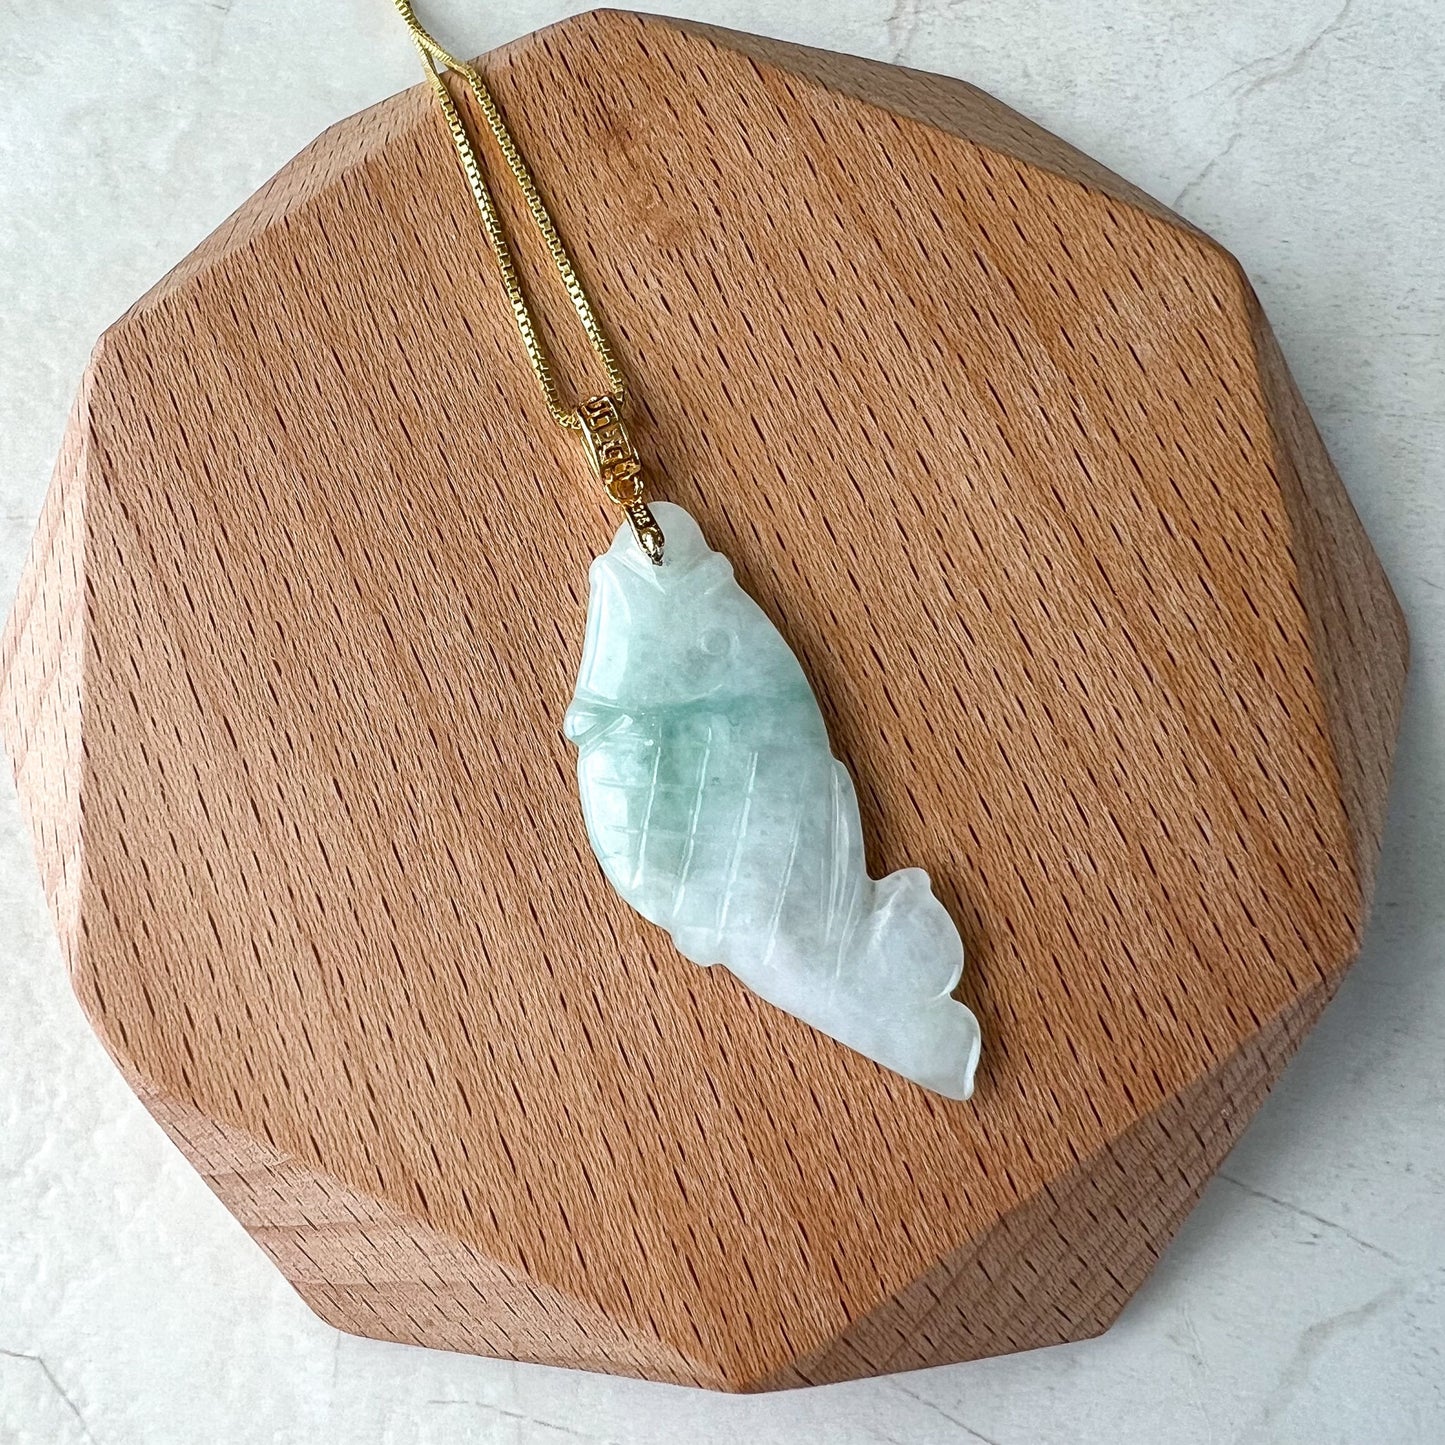 Jade Fish Pendant, Jadeite Jade, Sterling Silver Hand Carved Pendant Necklace, XY-0622-1678983571